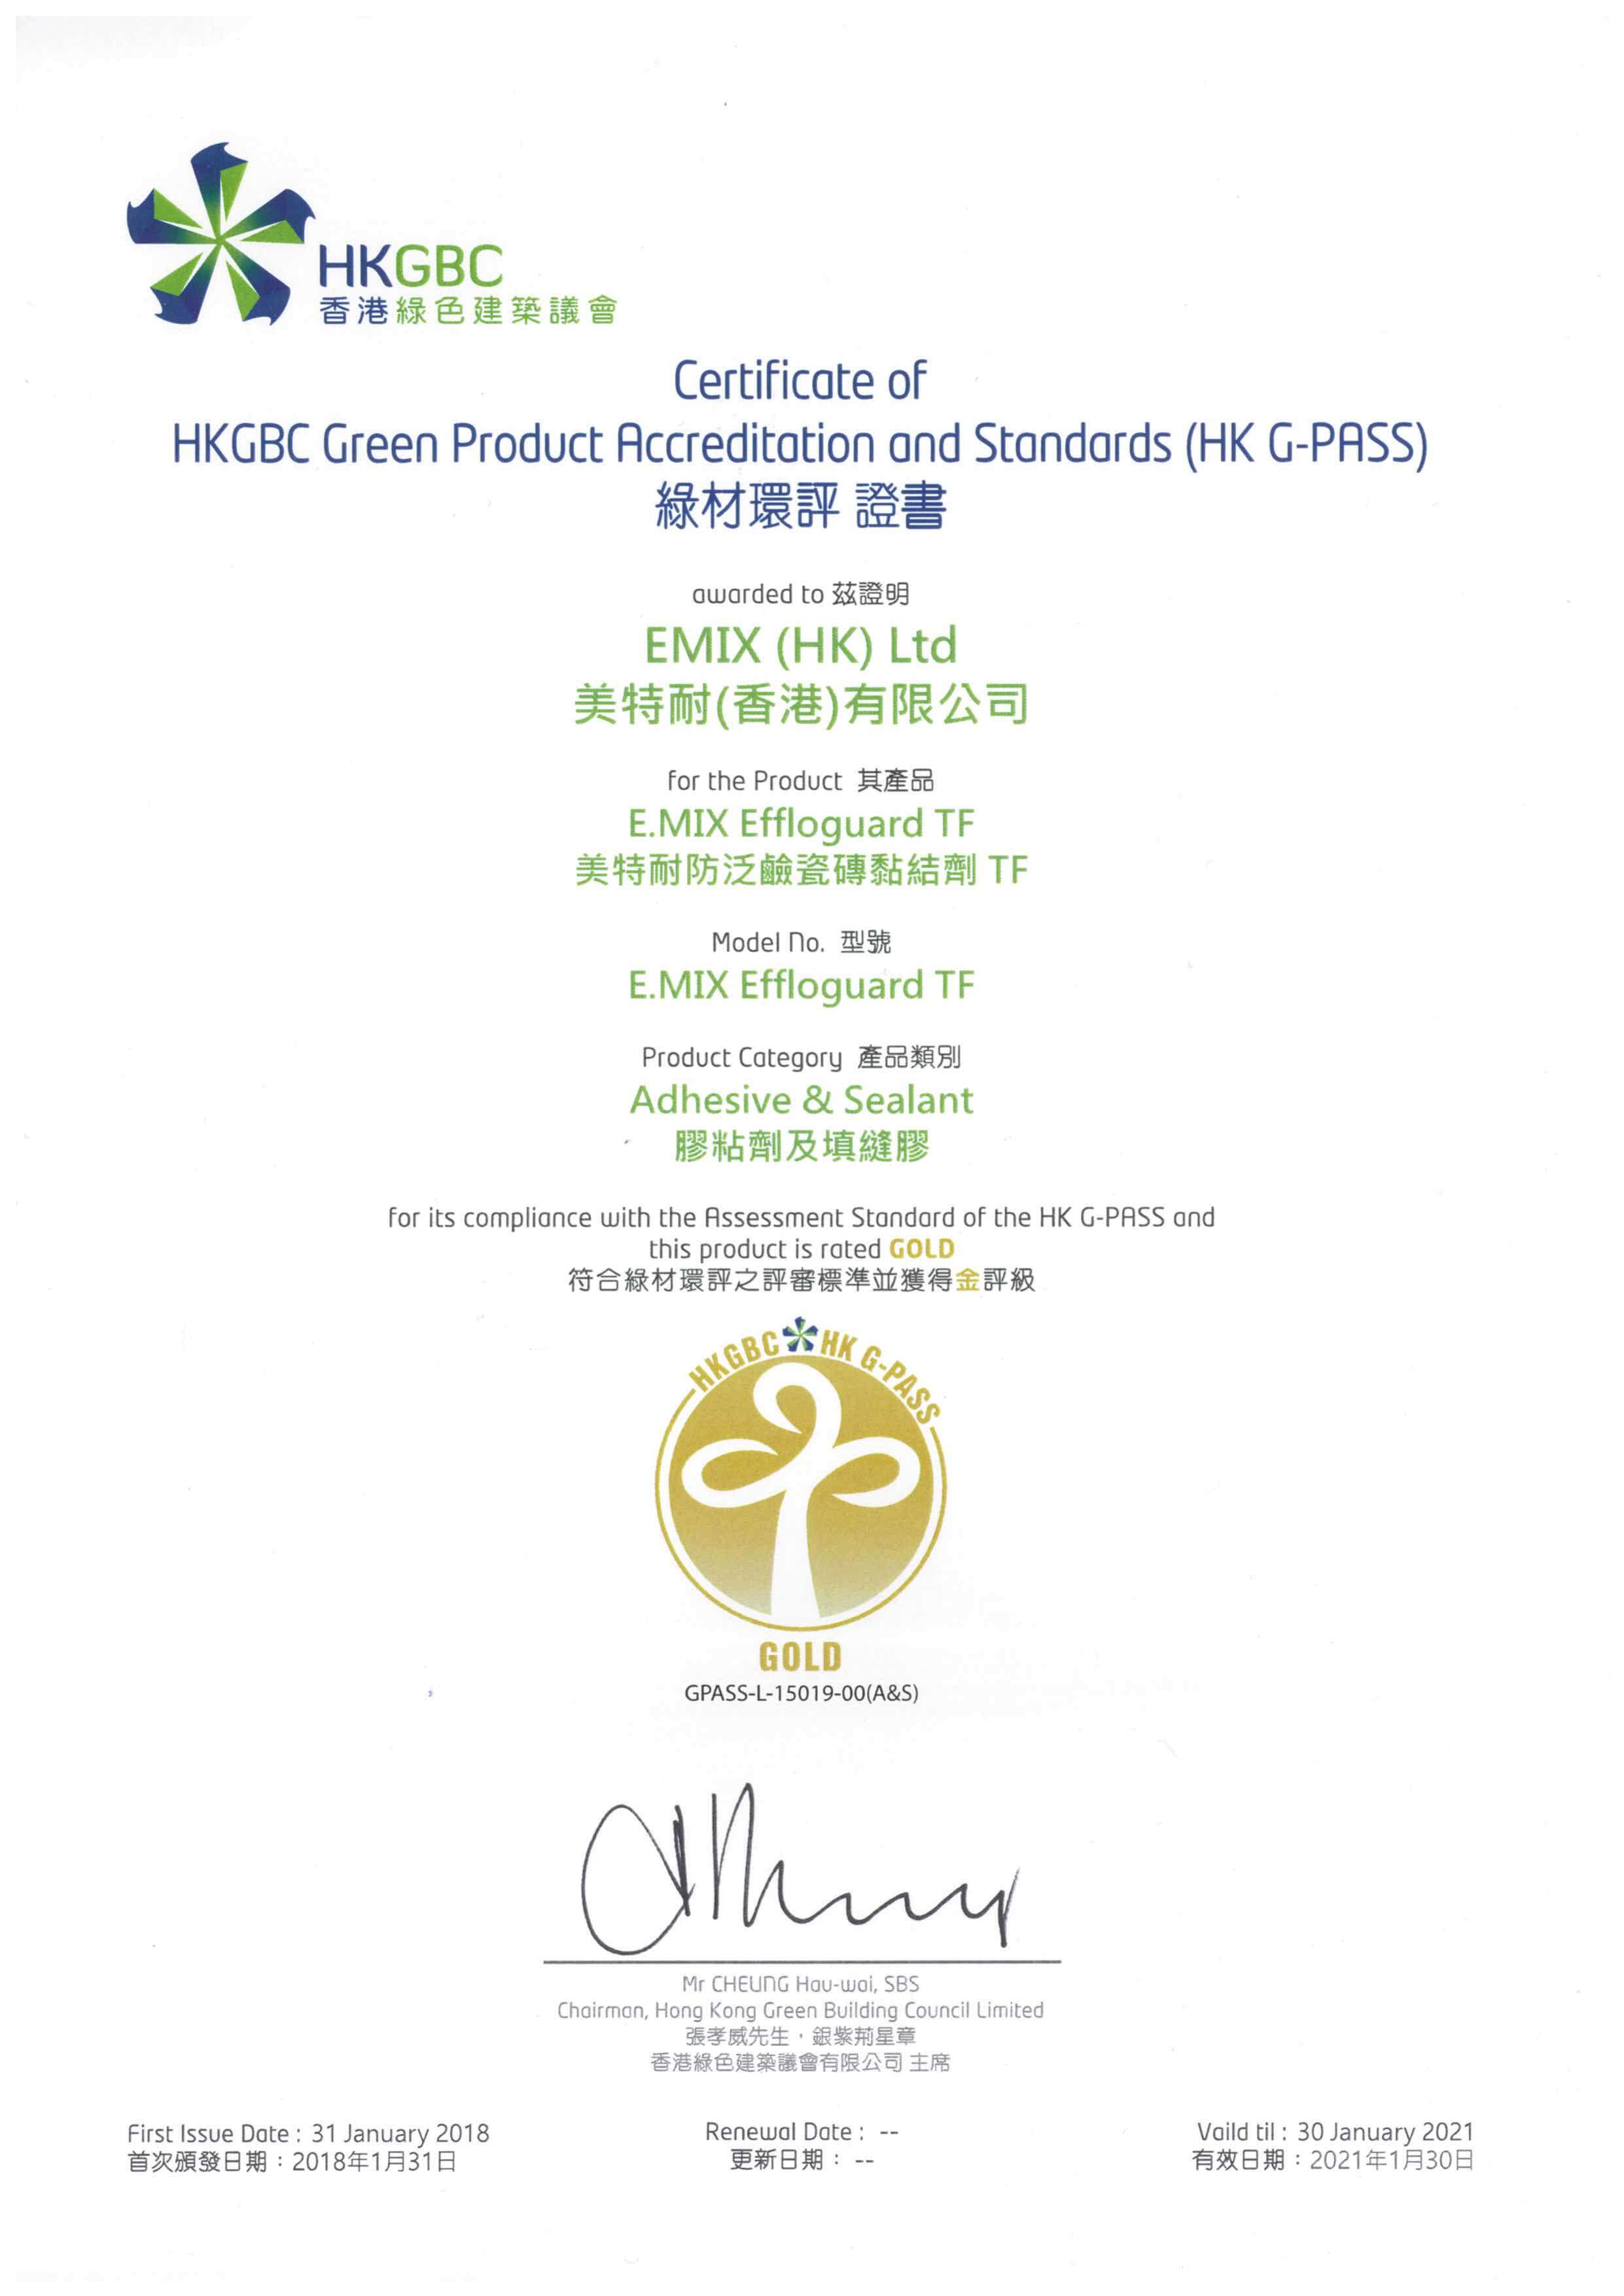 Gold-Rated Logo - E.MIX Effloguard TF achieve a Gold rating from HKGBC Green Product